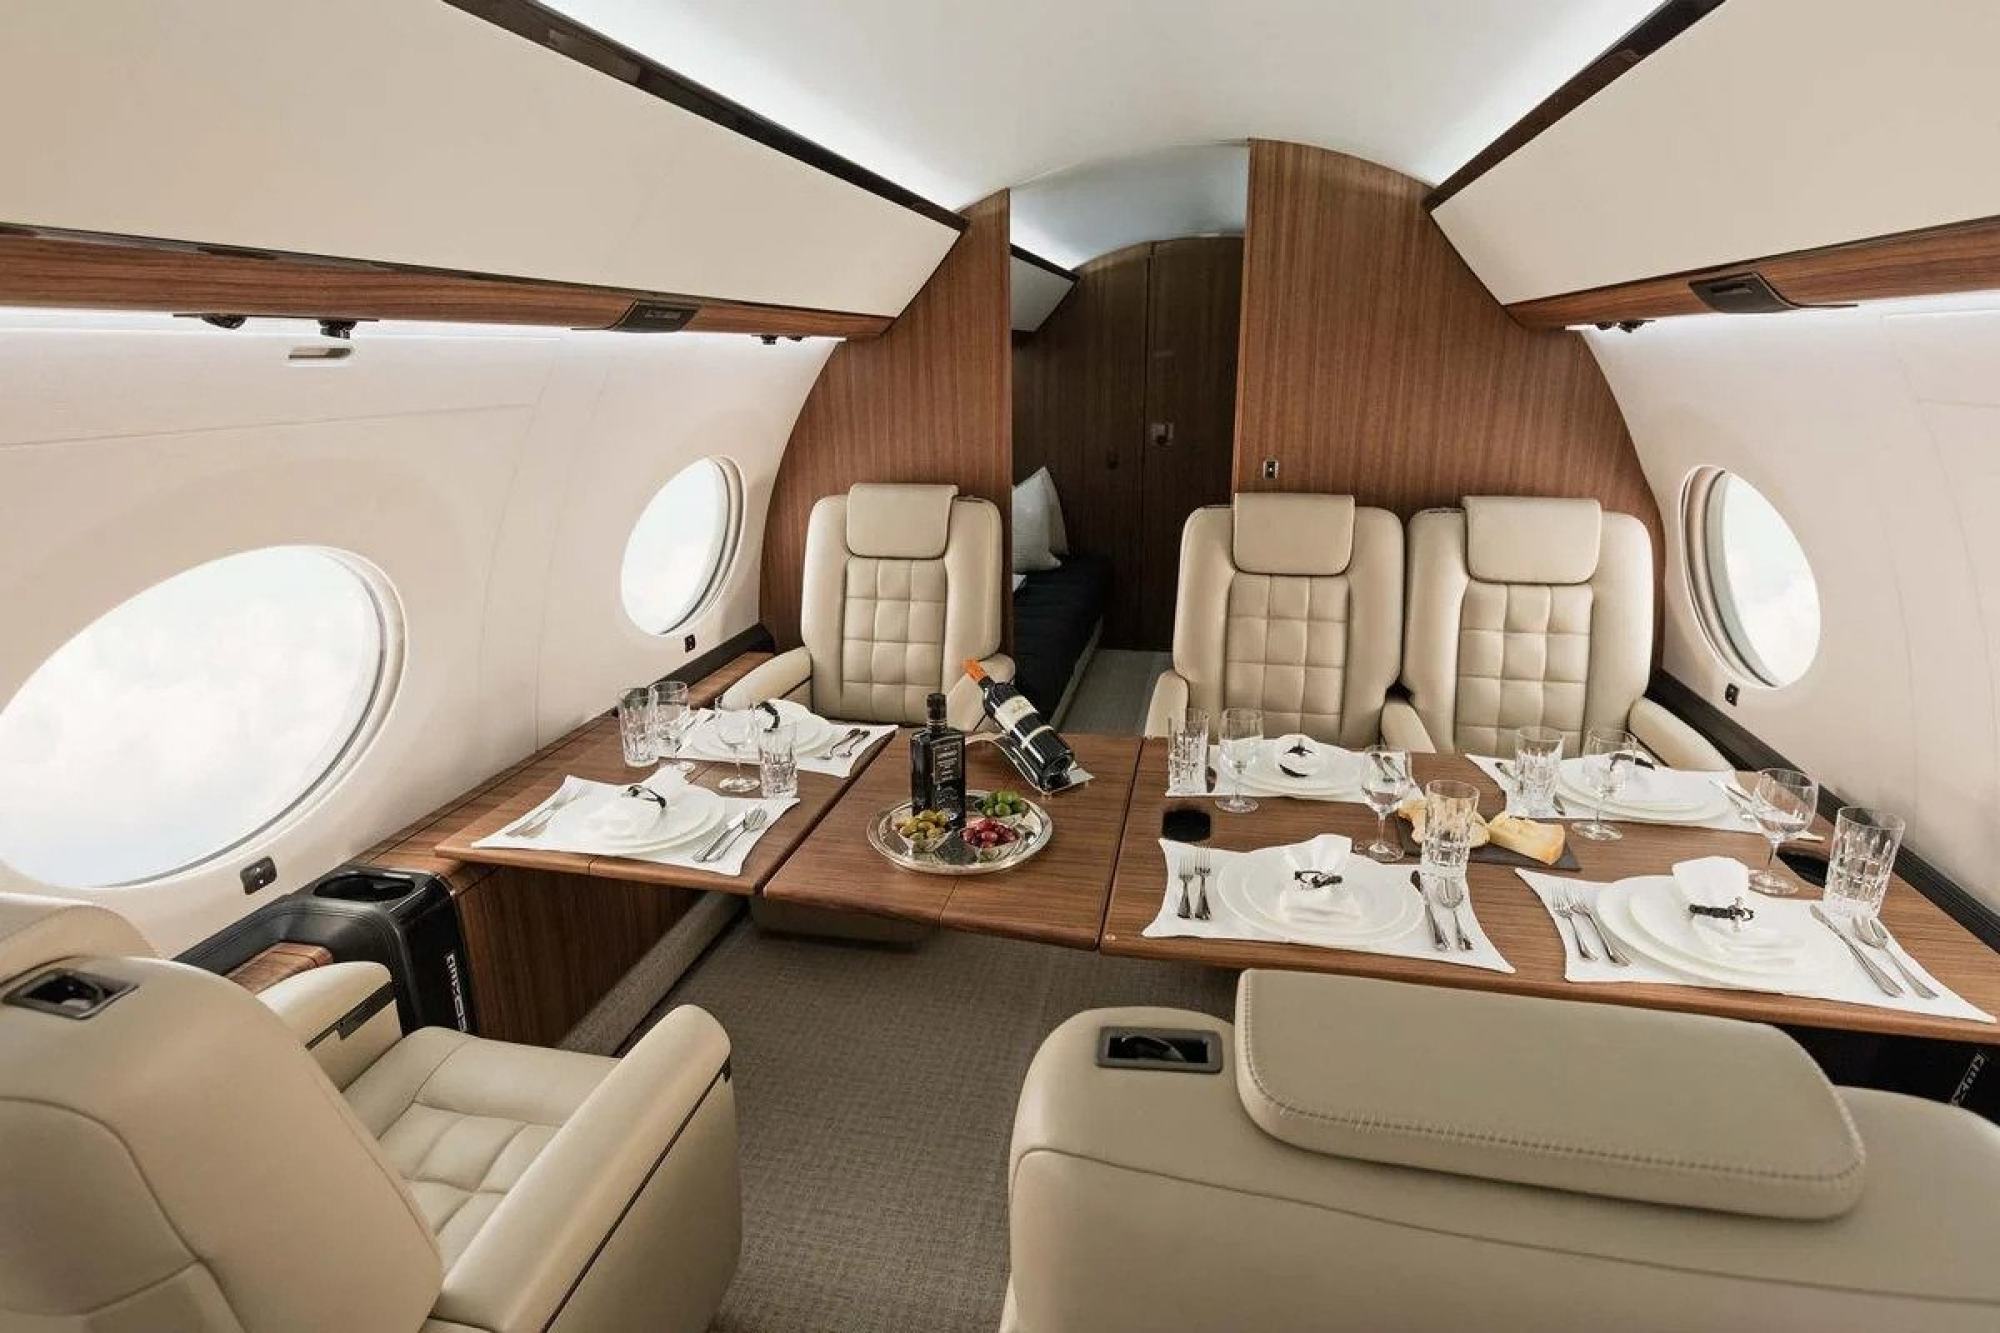 Unbelievable luxury inside the billionaire's $70 million private jet at home rented Elon Musk - Photo 3.